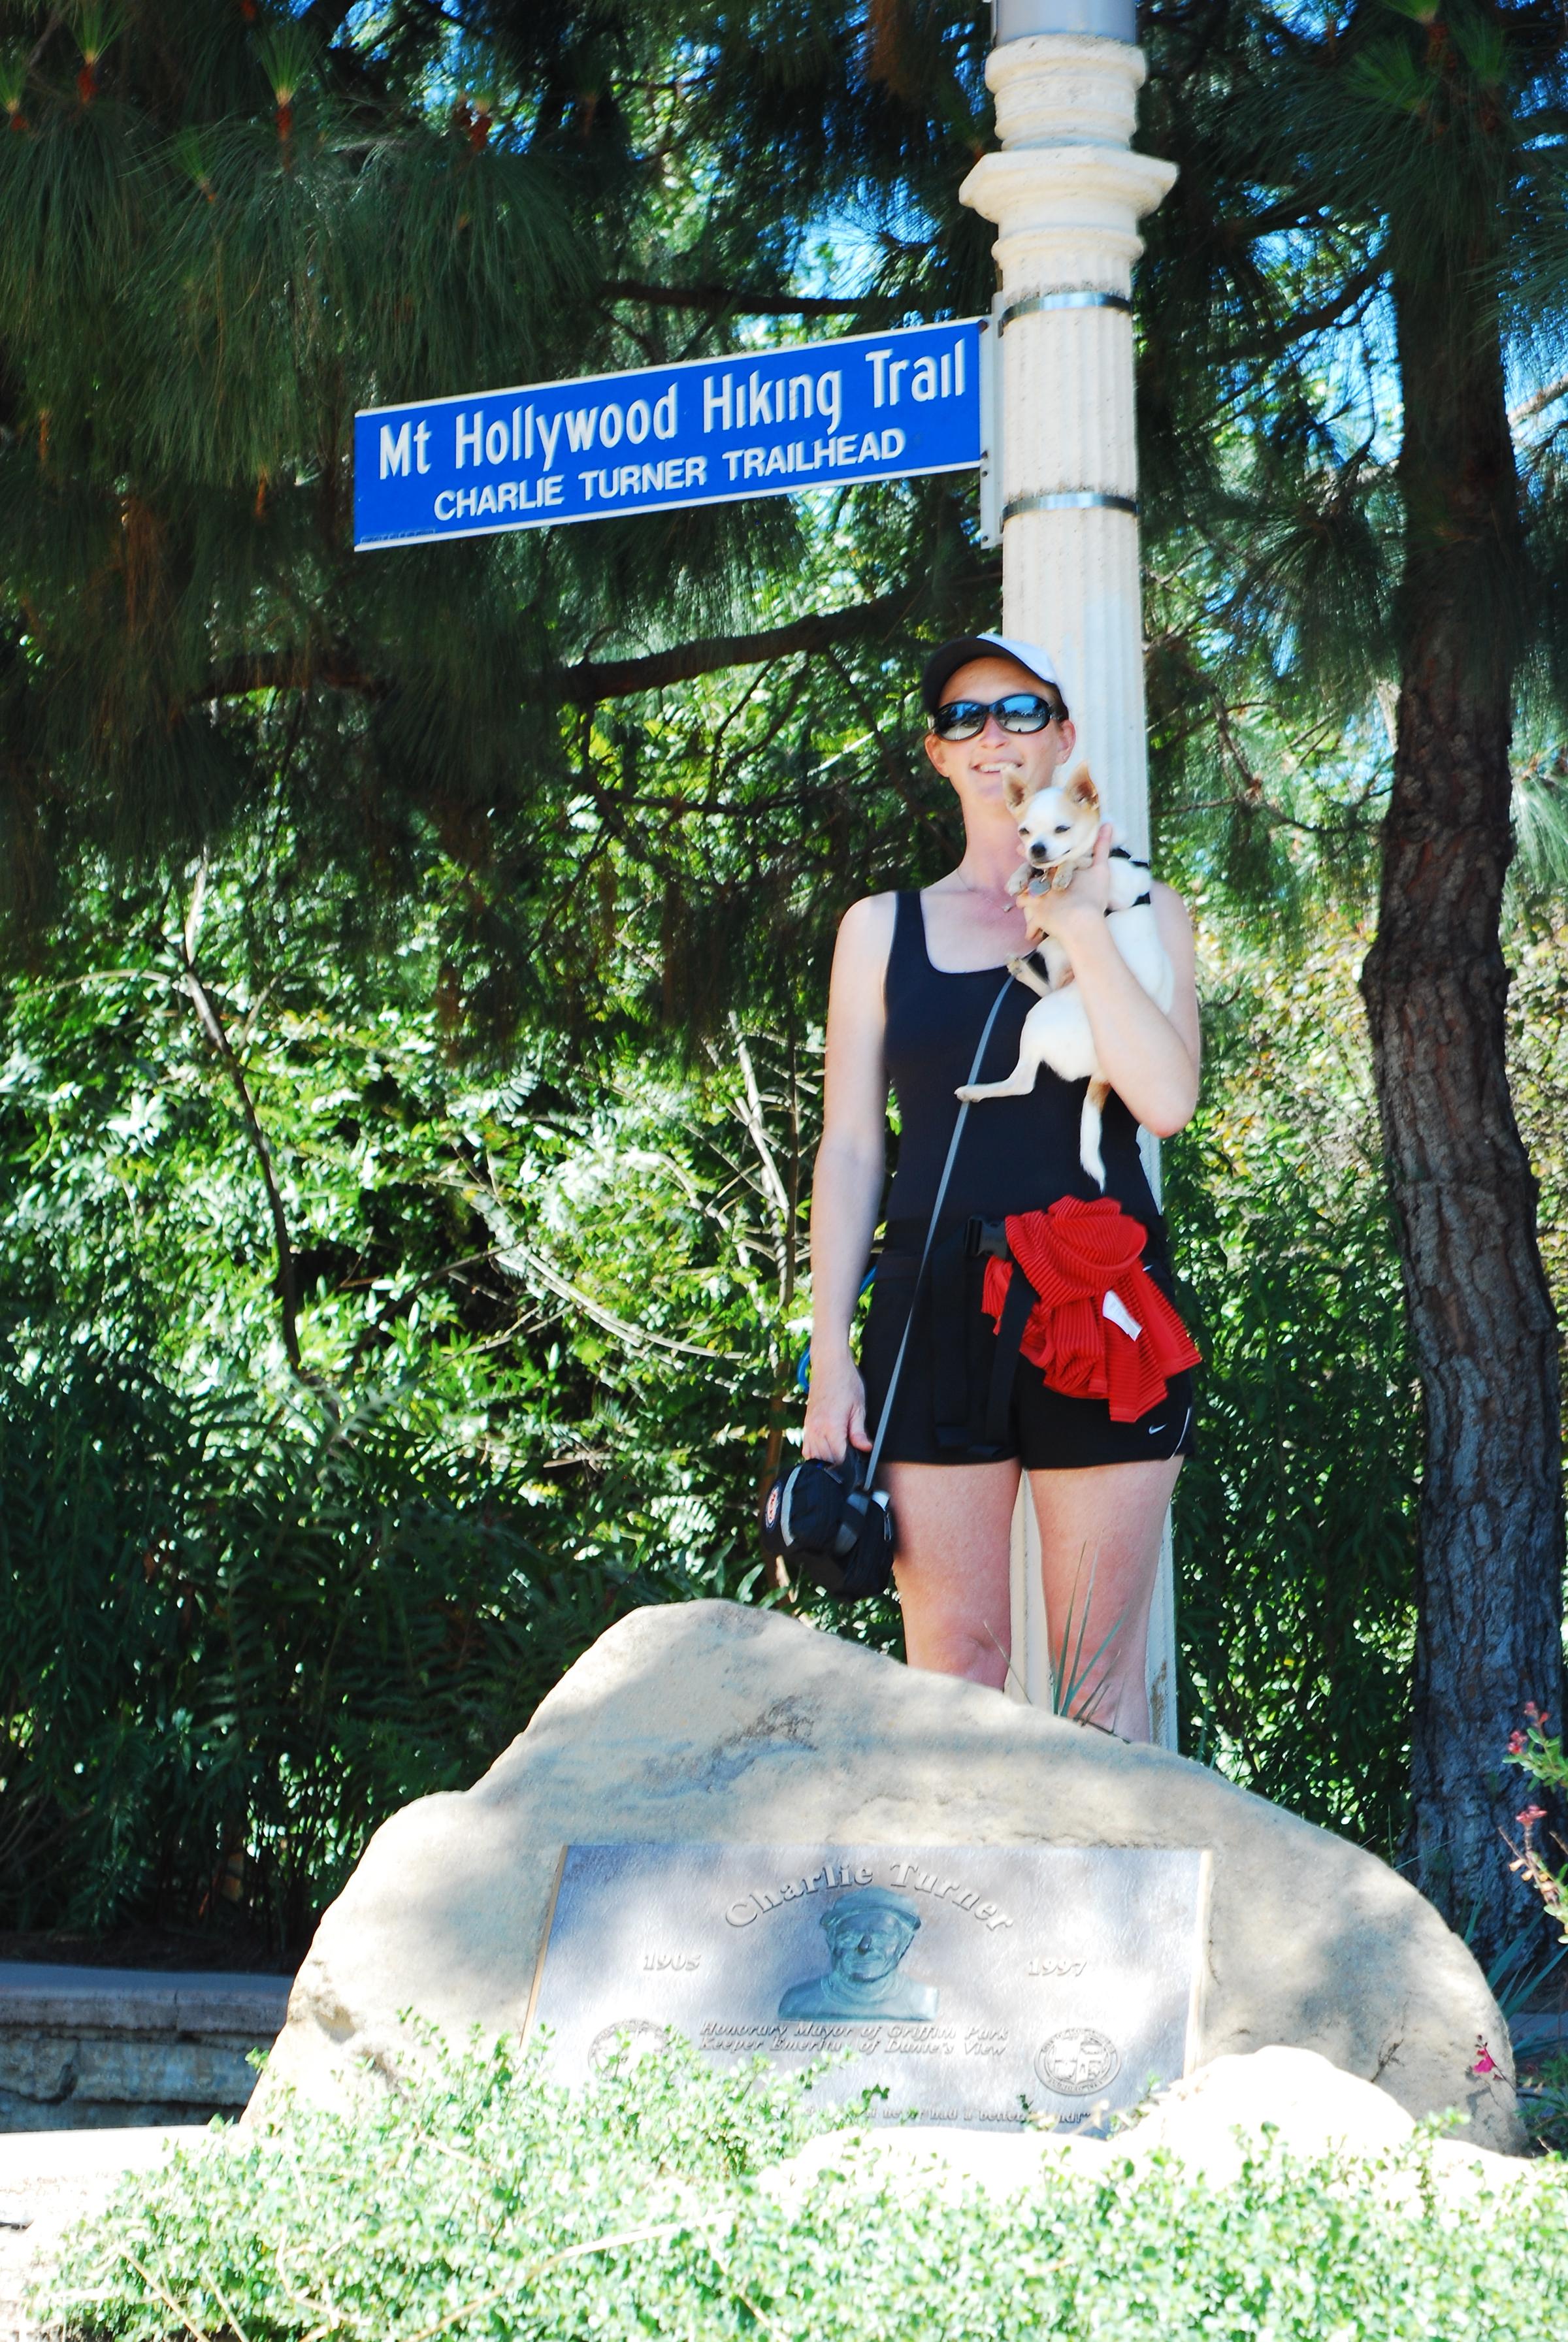 Pet Friendly Mount Hollywood Trail at Griffith Park